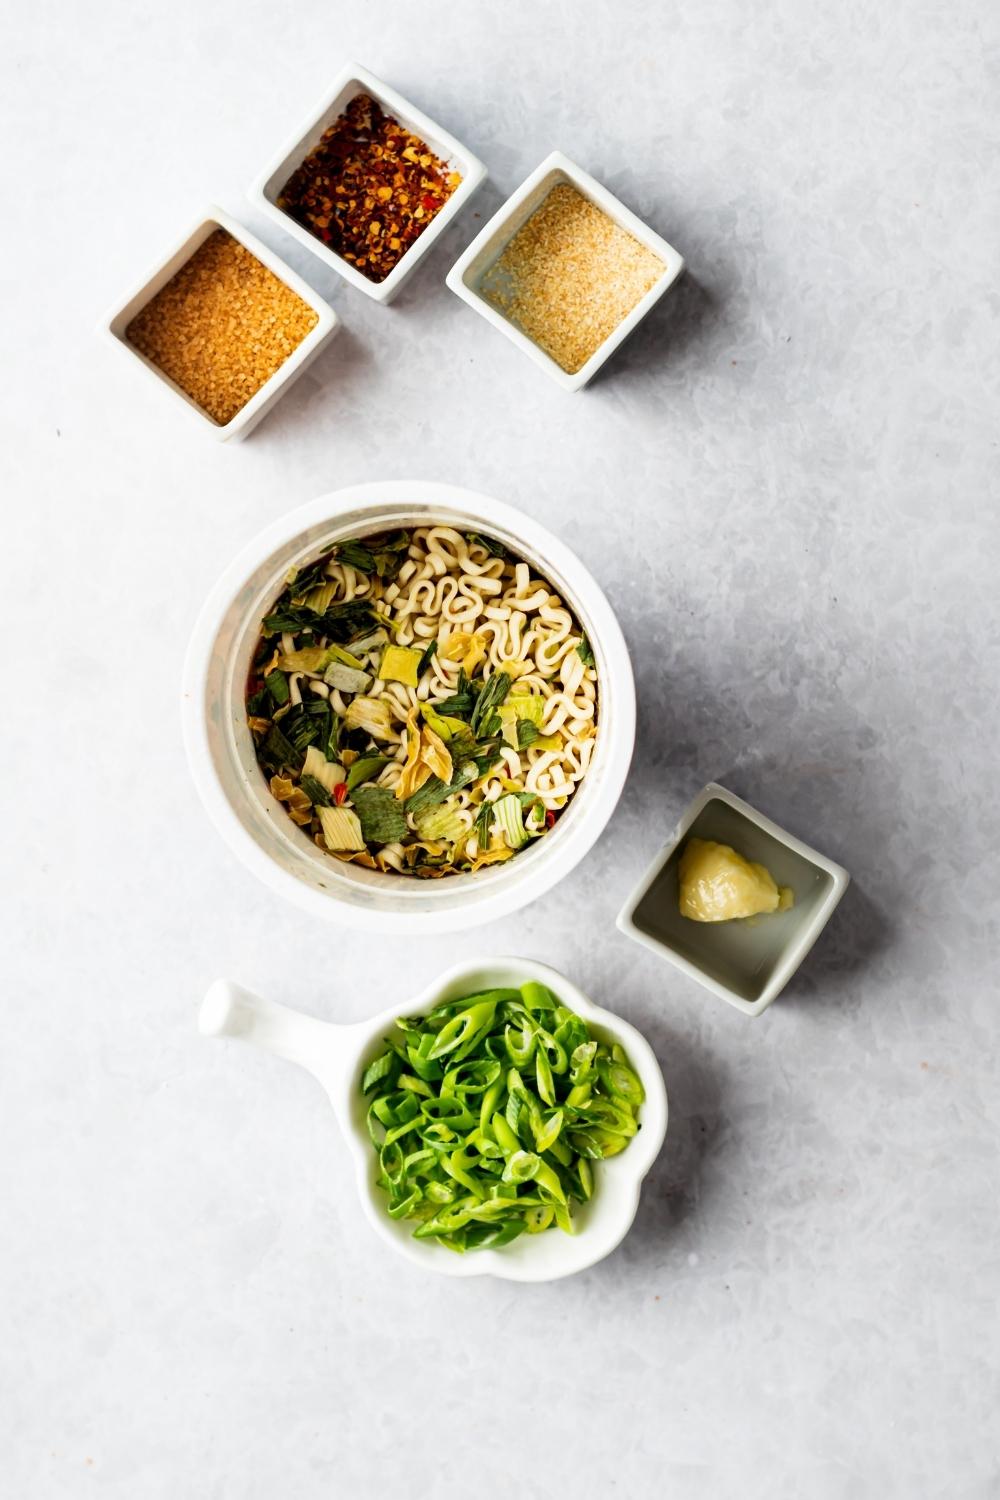 A bowl of chopped green onions, a bowl with butter in it, a bowl of ramen noodles, a square dish of red pepper flakes, a square dish of garlic powder on a grey counter.